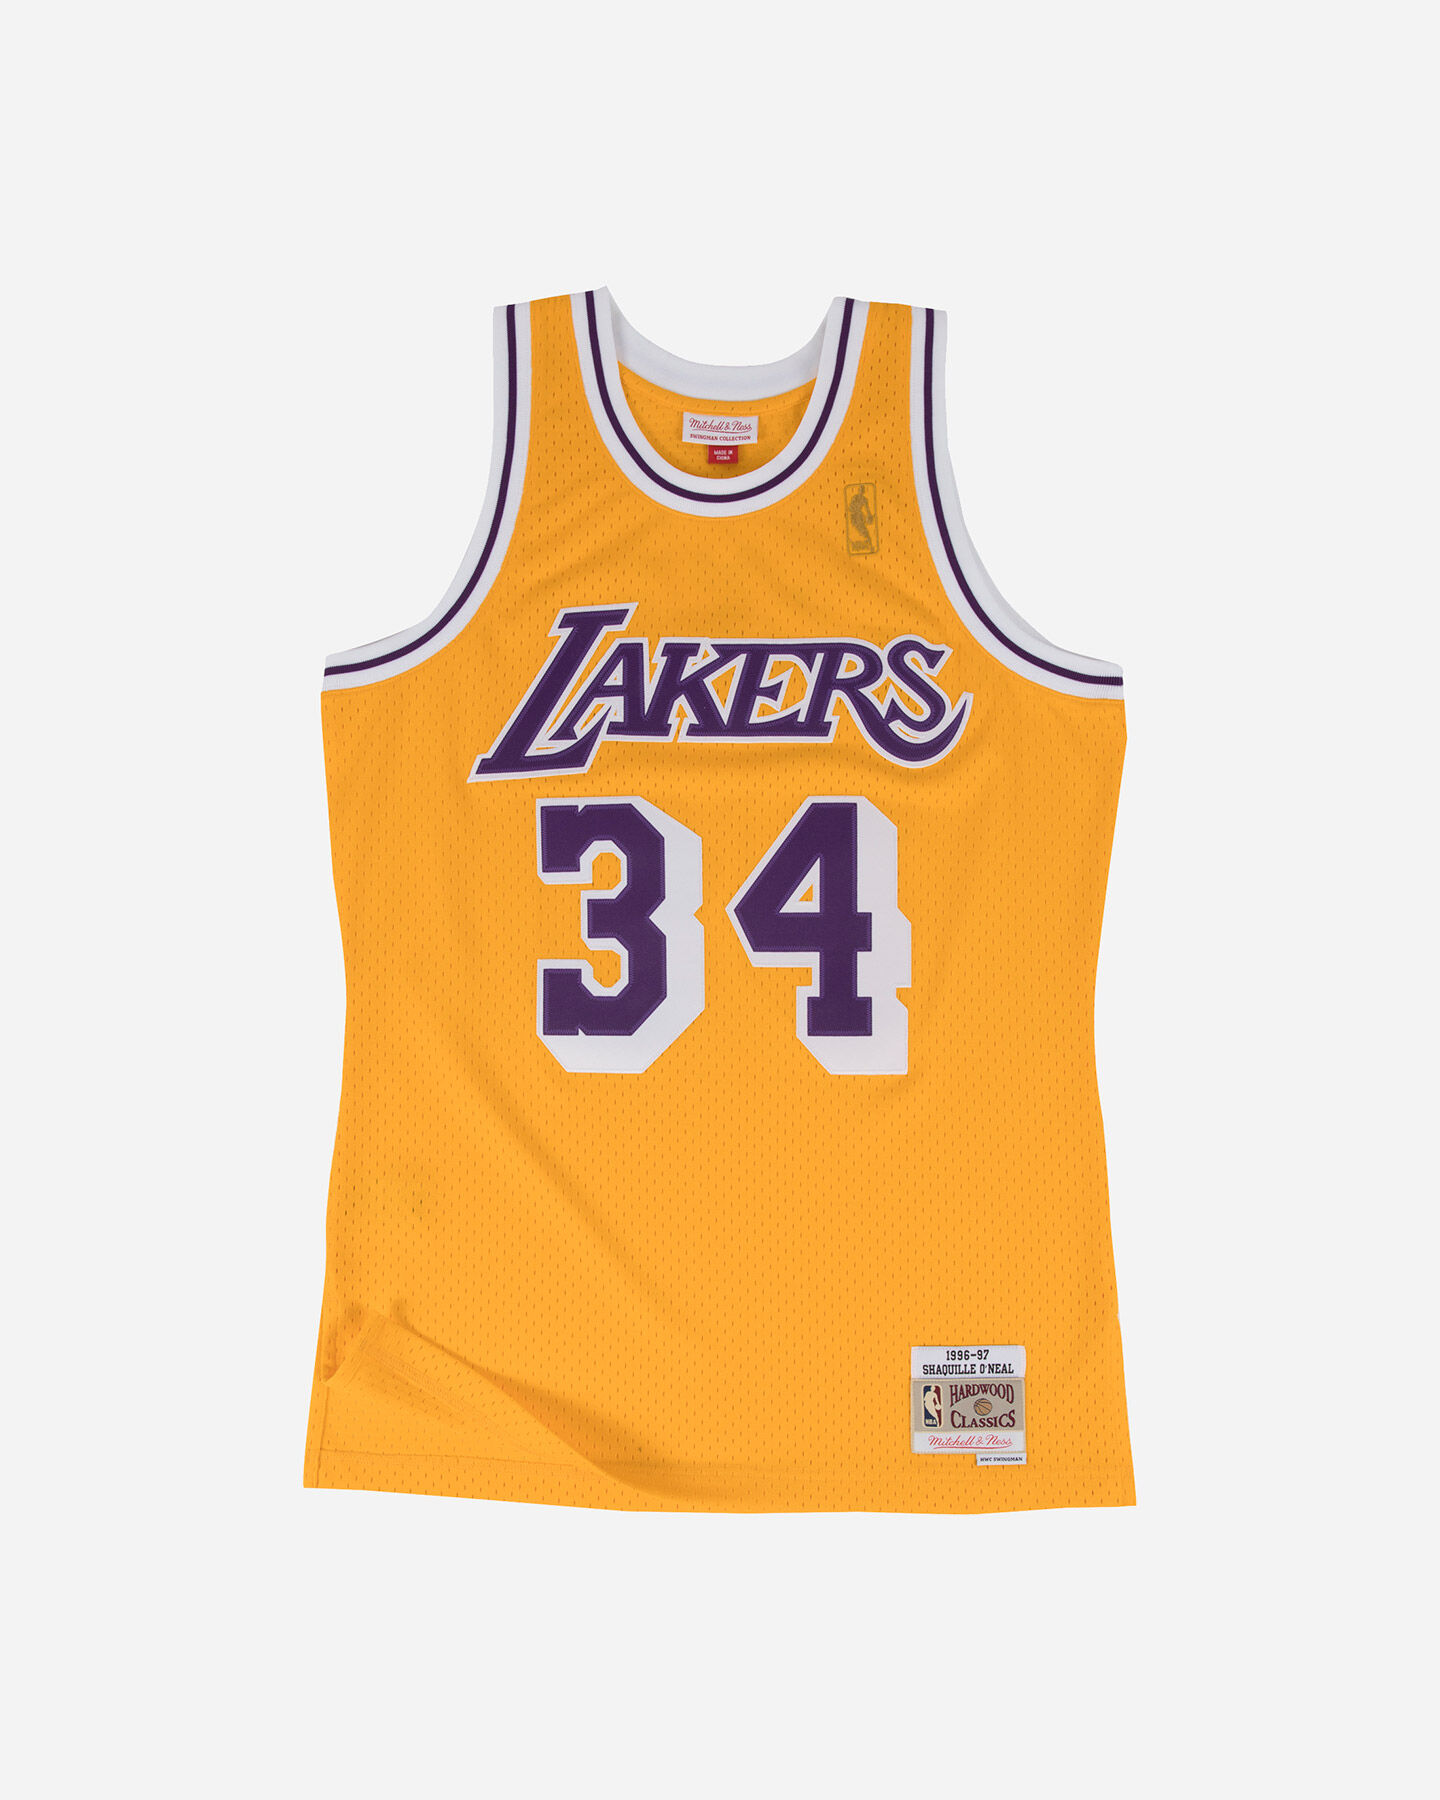  Canotta basket MITCHELL&NESS NBA LOS ANGELES LAKERS SHAQUILLE O'NEAL '96 IC M S4100057|001|S scatto 0